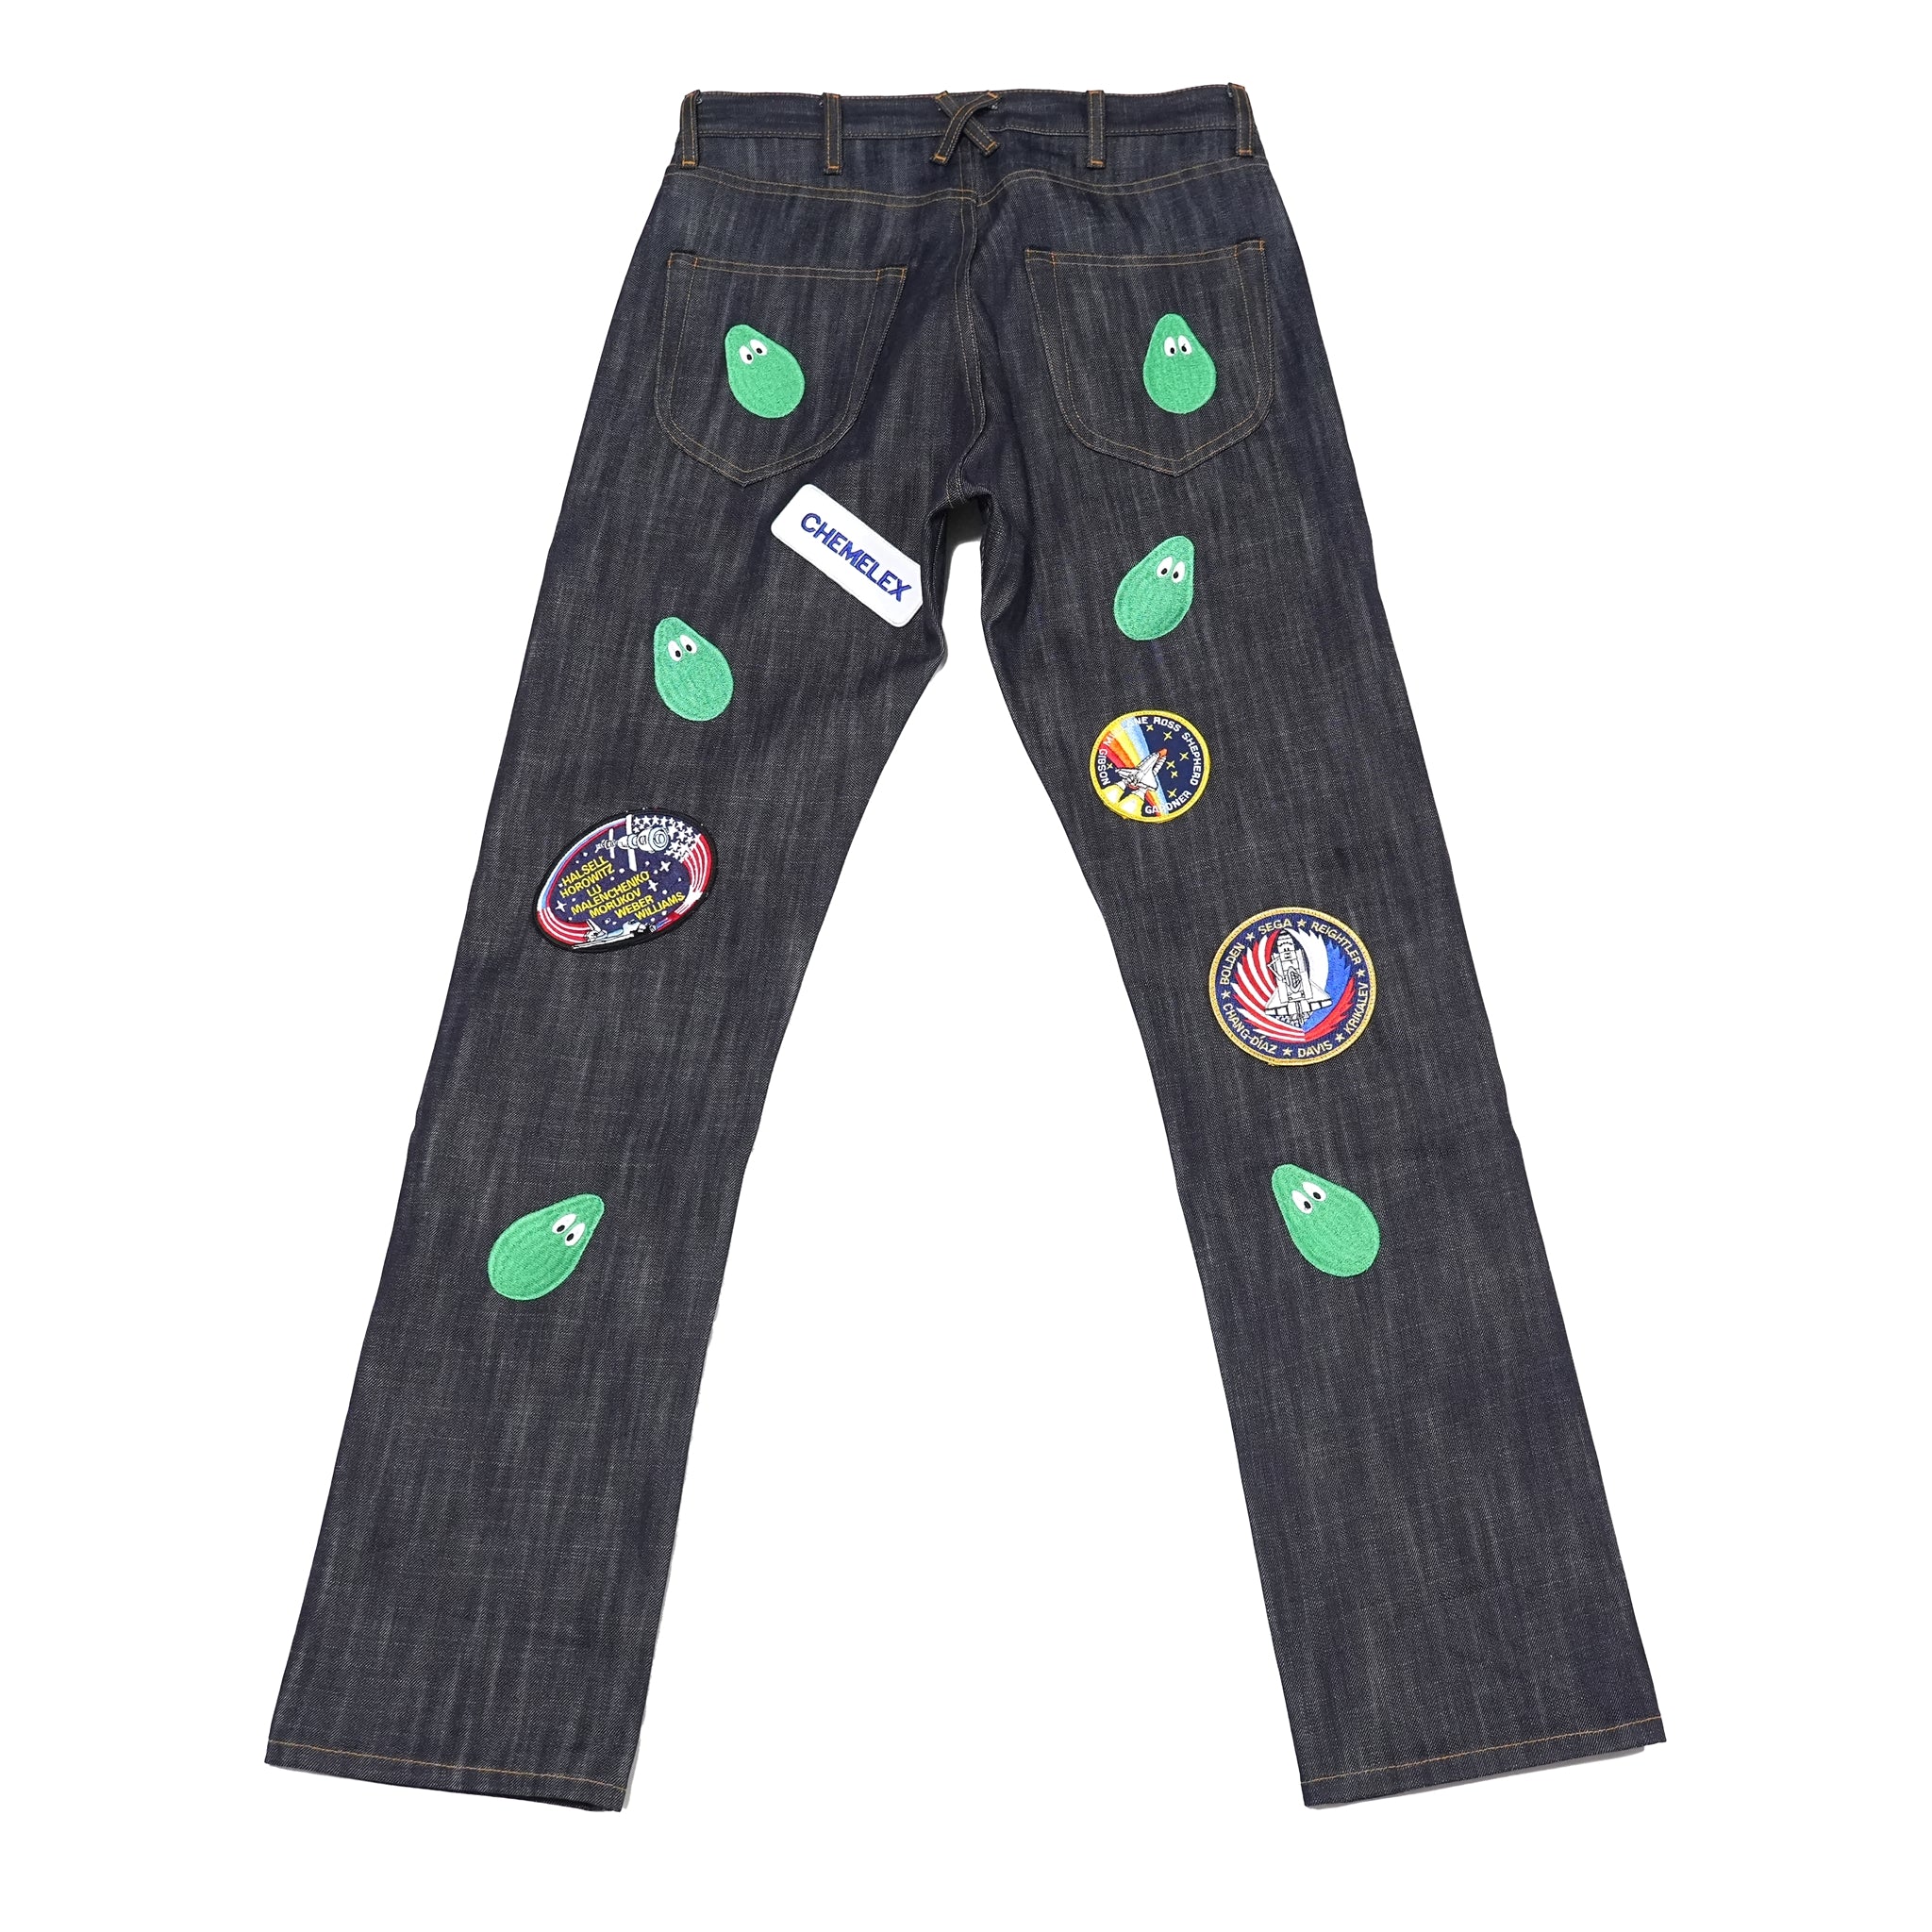 No:M31304 | Name:Monitaly Xx Jeans W/ Avocado Embroidery And Patches | Color:Cone Ds Selvage Denim【MONITALY_モニタリー】